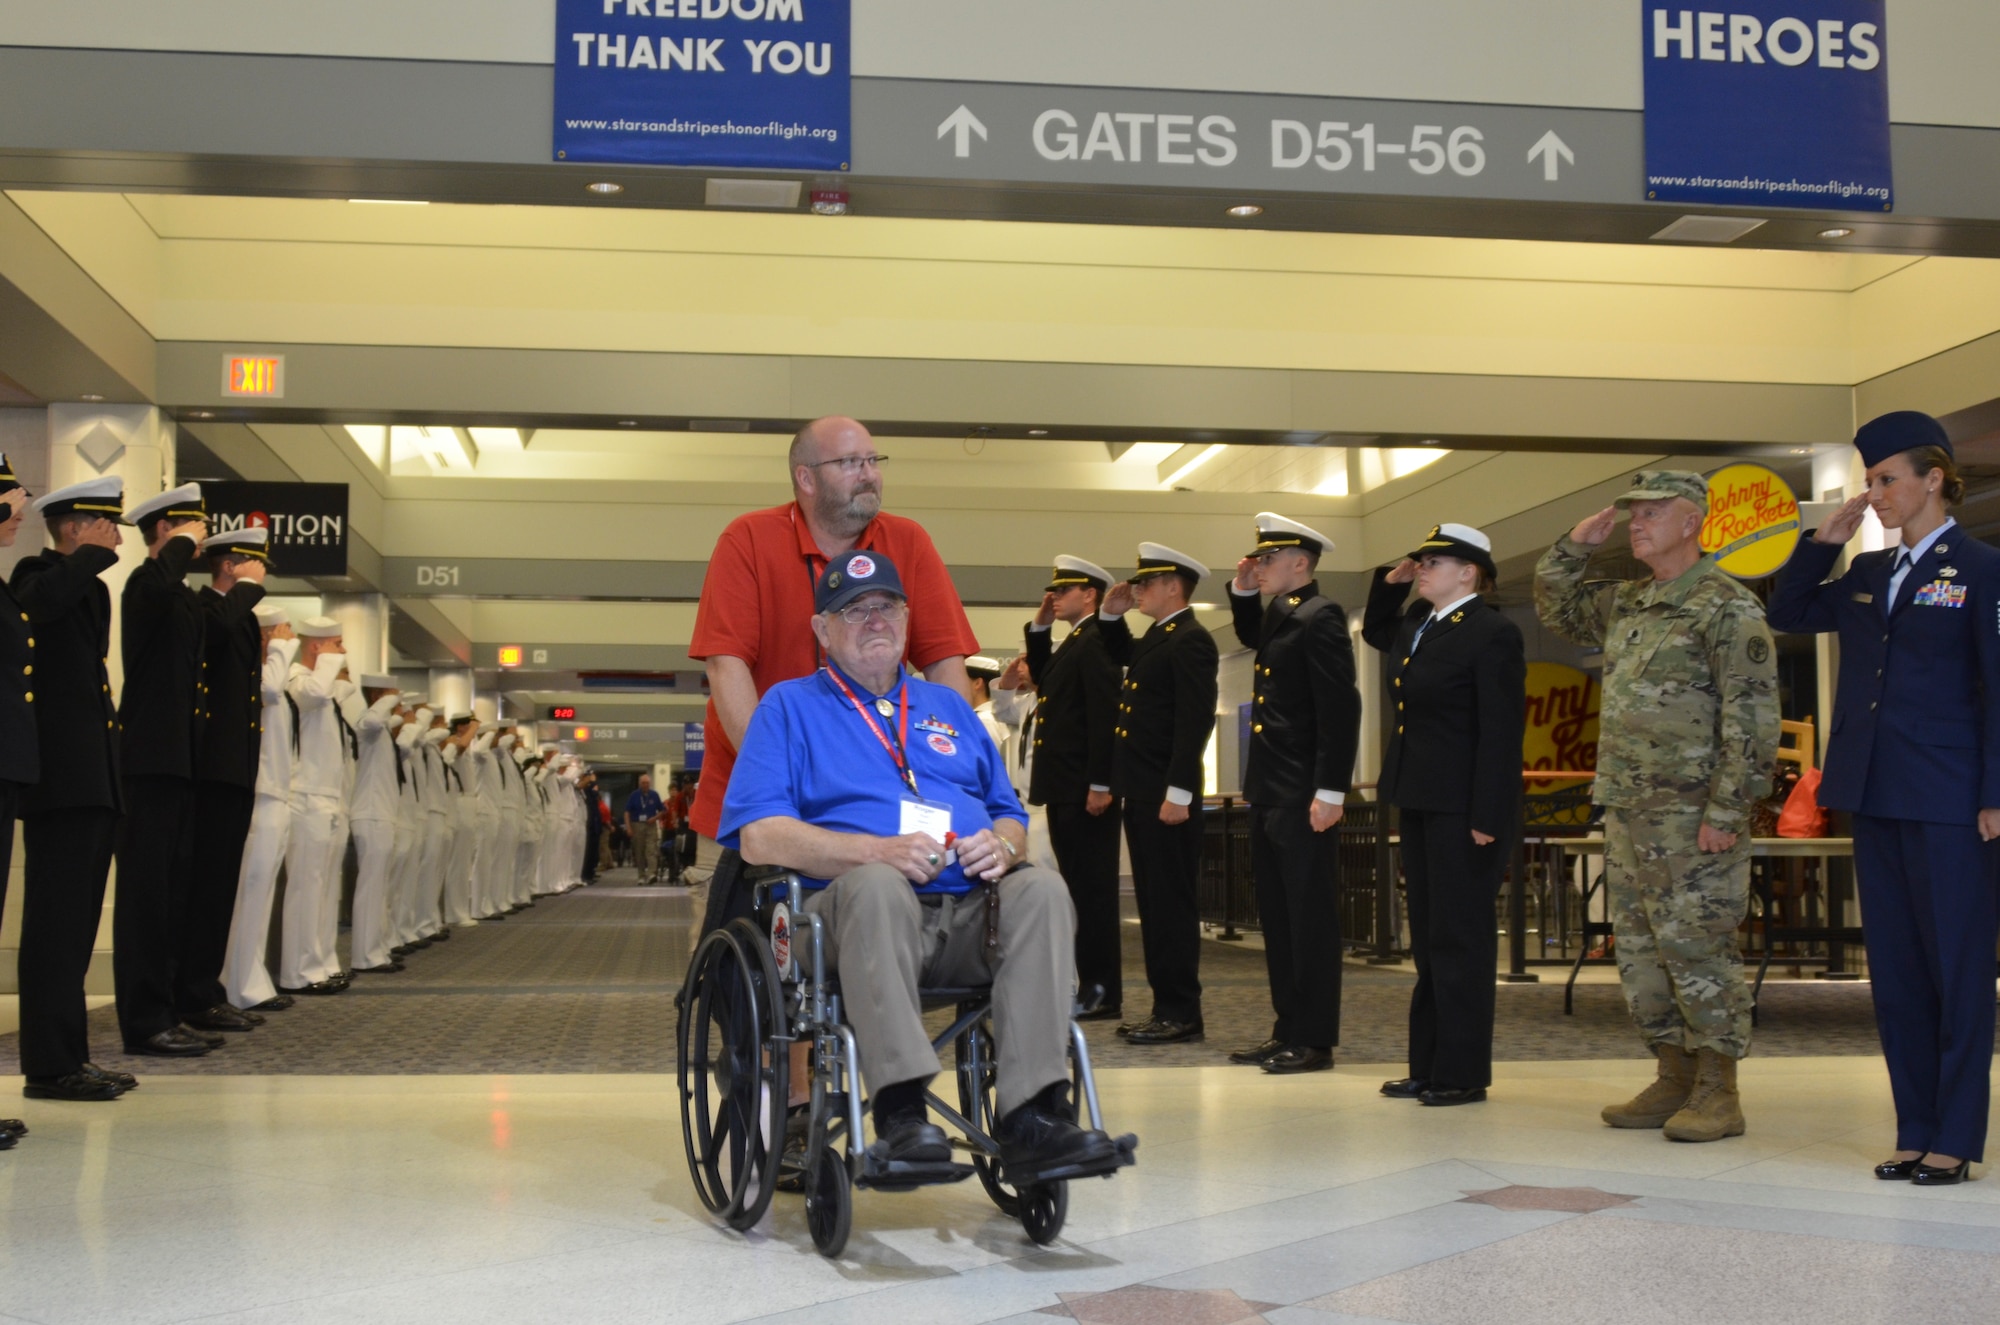 Recalling memories and making new ones: Stars and Stripes Honor Flight makes a big impact on participants and volunteers Sept. 17, 2016 at General Billy Mitchell International Airport, Milwaukee, Wisconsin. Several Airmen with the128th Air Refueling Wing joined other veteran participants, volunteers, family members and friends in the emotional evening, as approximately 600 volunteers participated in the Welcome Home Ceremony. (U.S. Air National Guard photo by Tech. Sgt. Meghan Skrepenski, 128th Air Refueling Wing Public Affairs) 